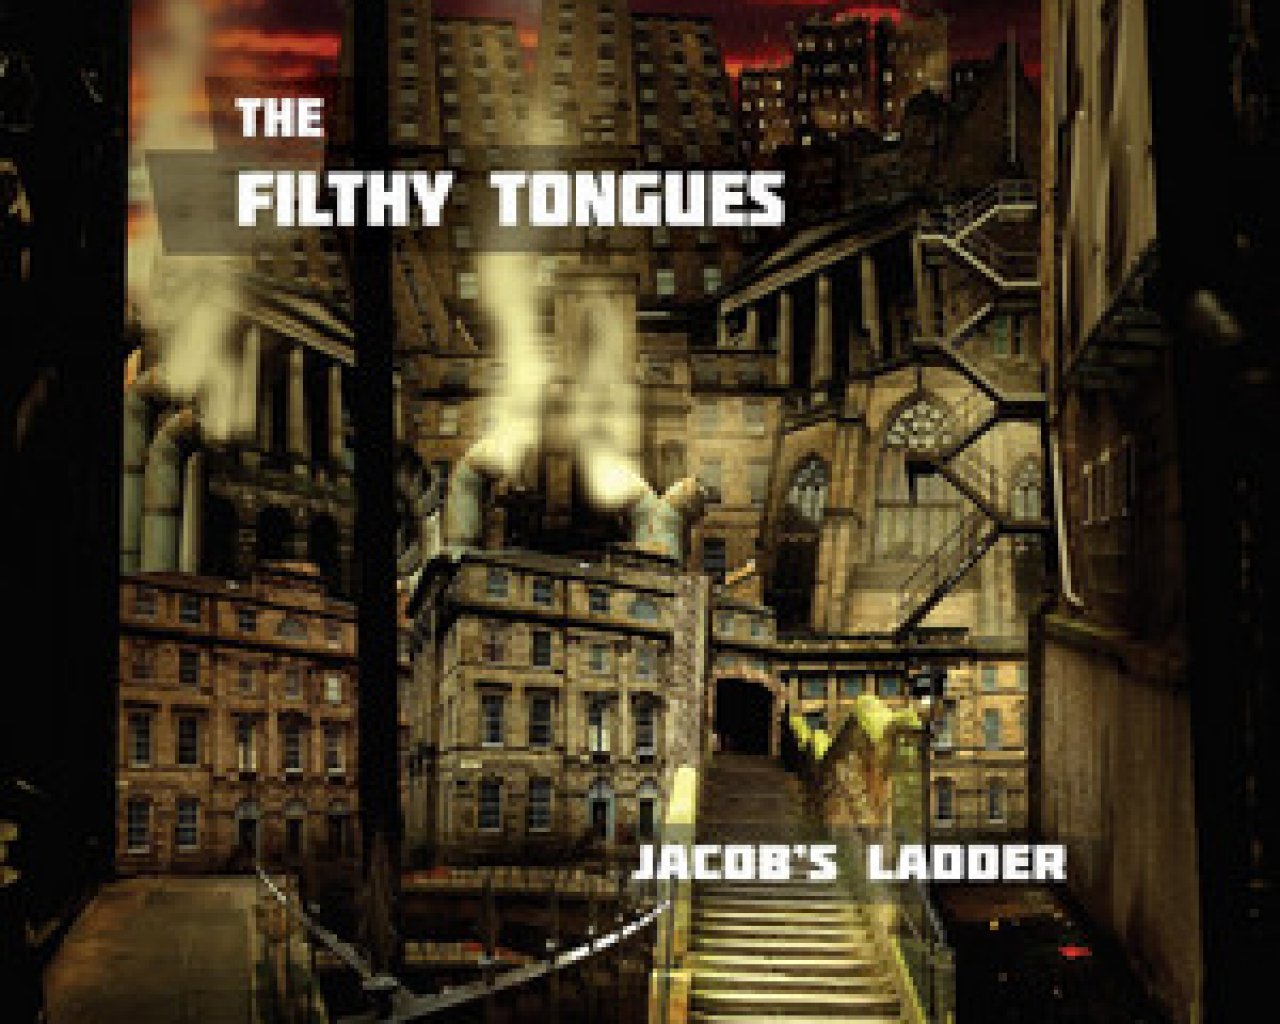 The Filthy Tongues